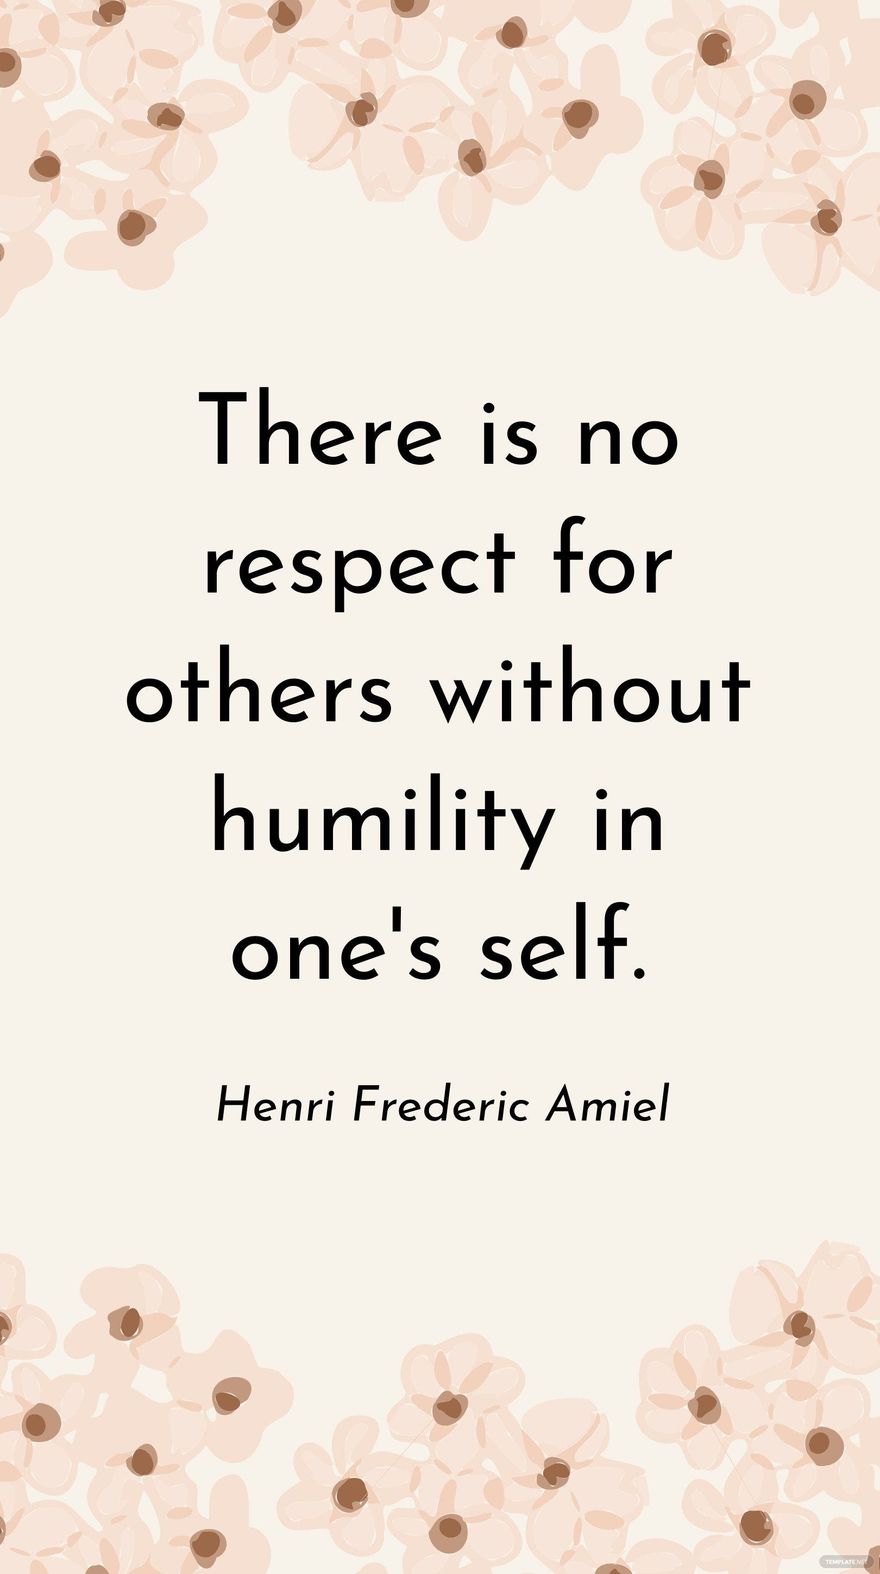 Henri Frederic Amiel - There is no respect for others without humility in one's self.